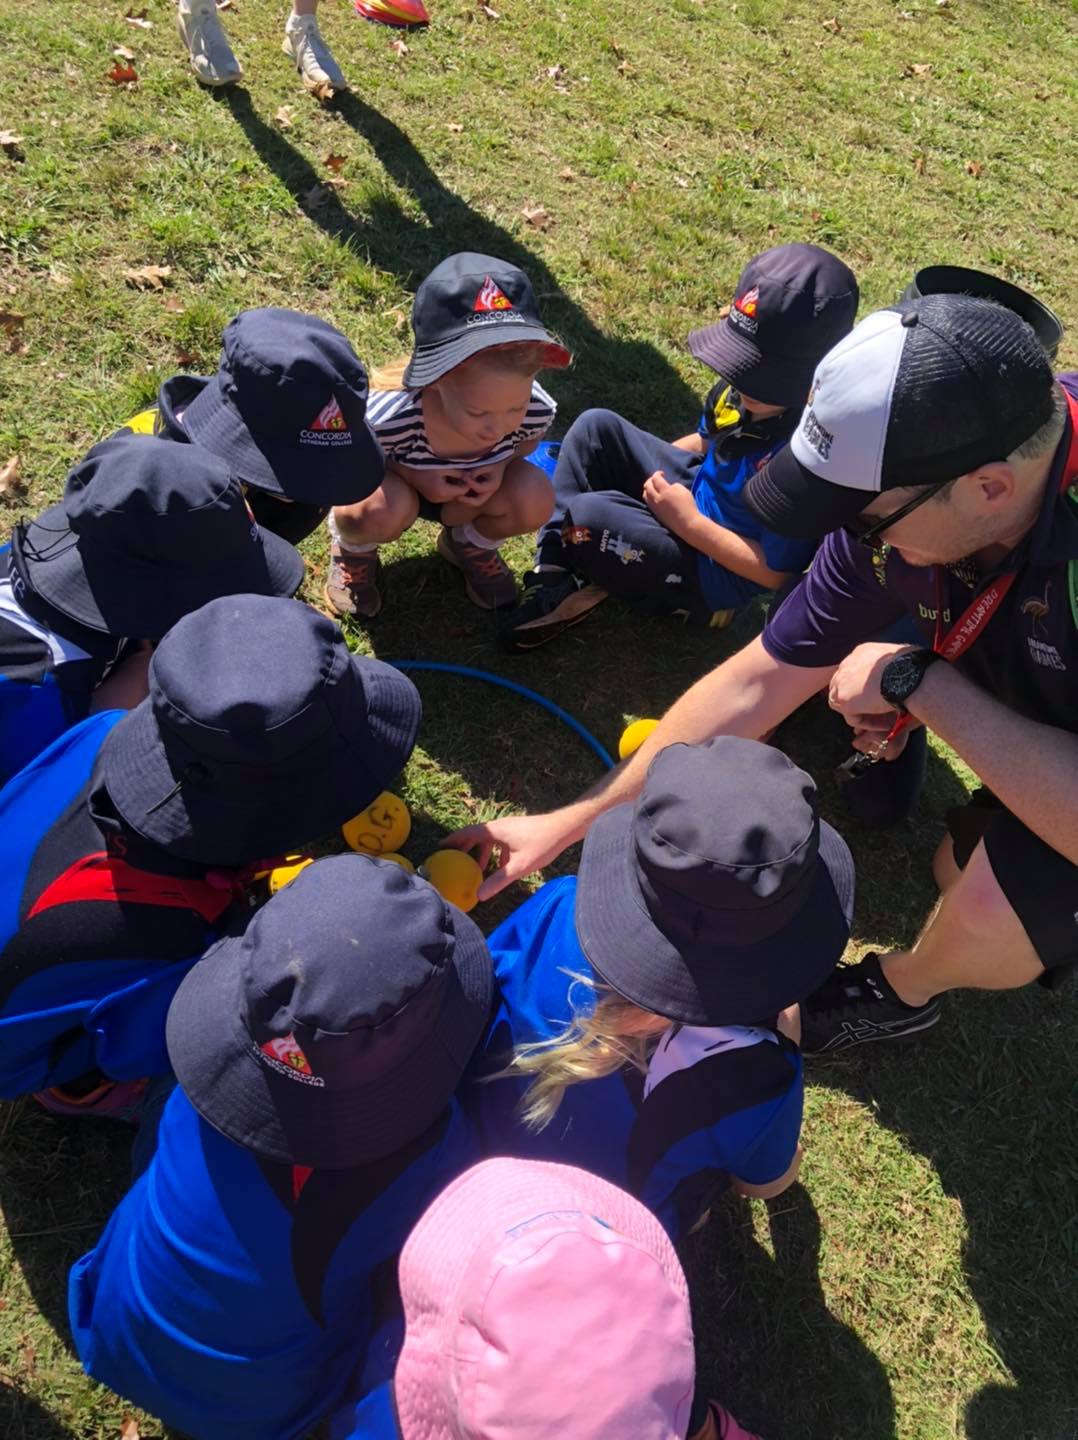 Dreamtime Games Kindy activities